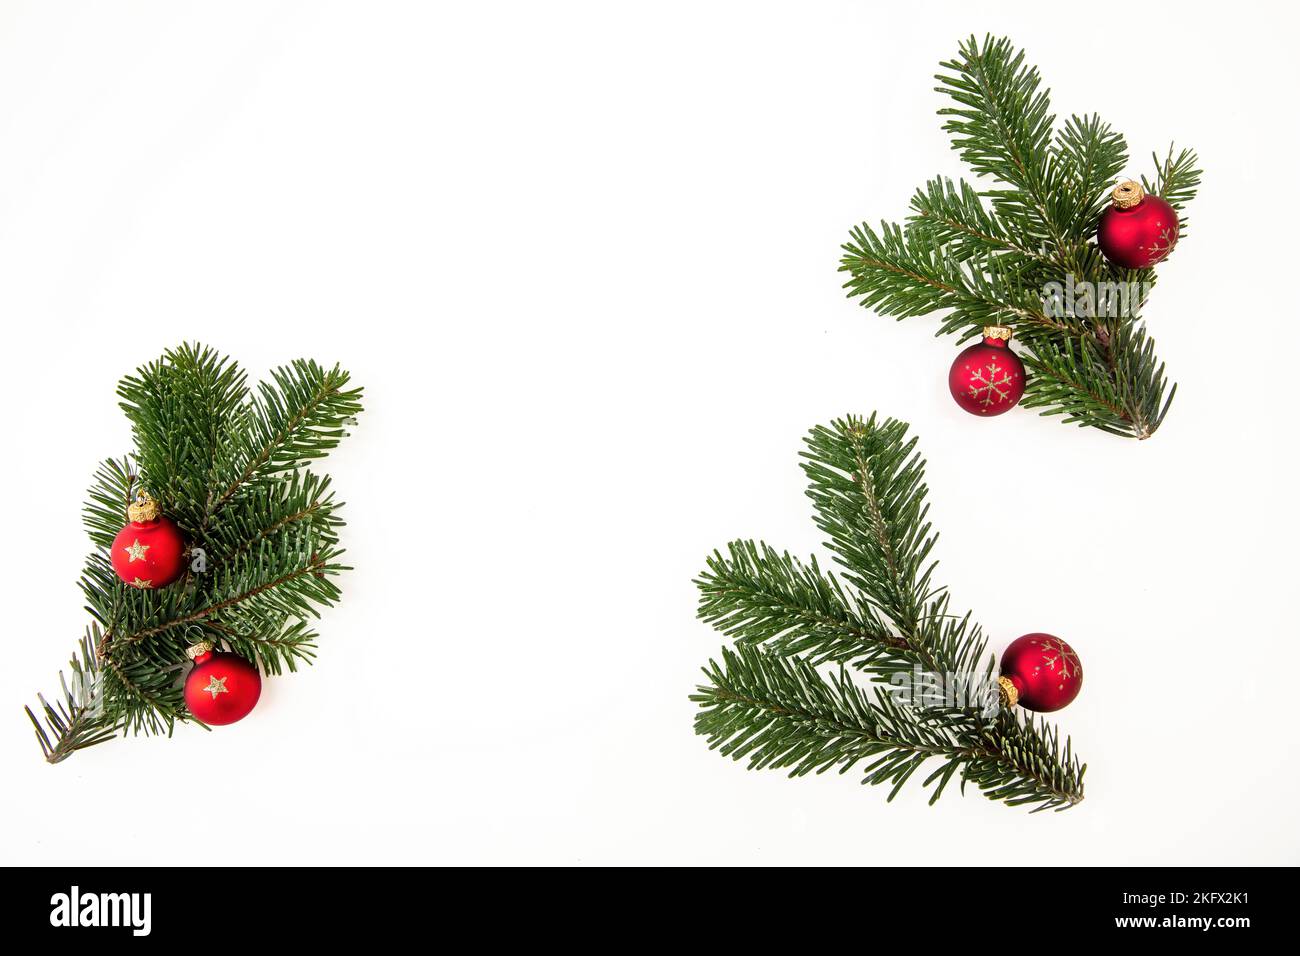 Christmas Fir twigs isolated on white background. Xmas decoration, fresh pine branch and red bauble. Stock Photo